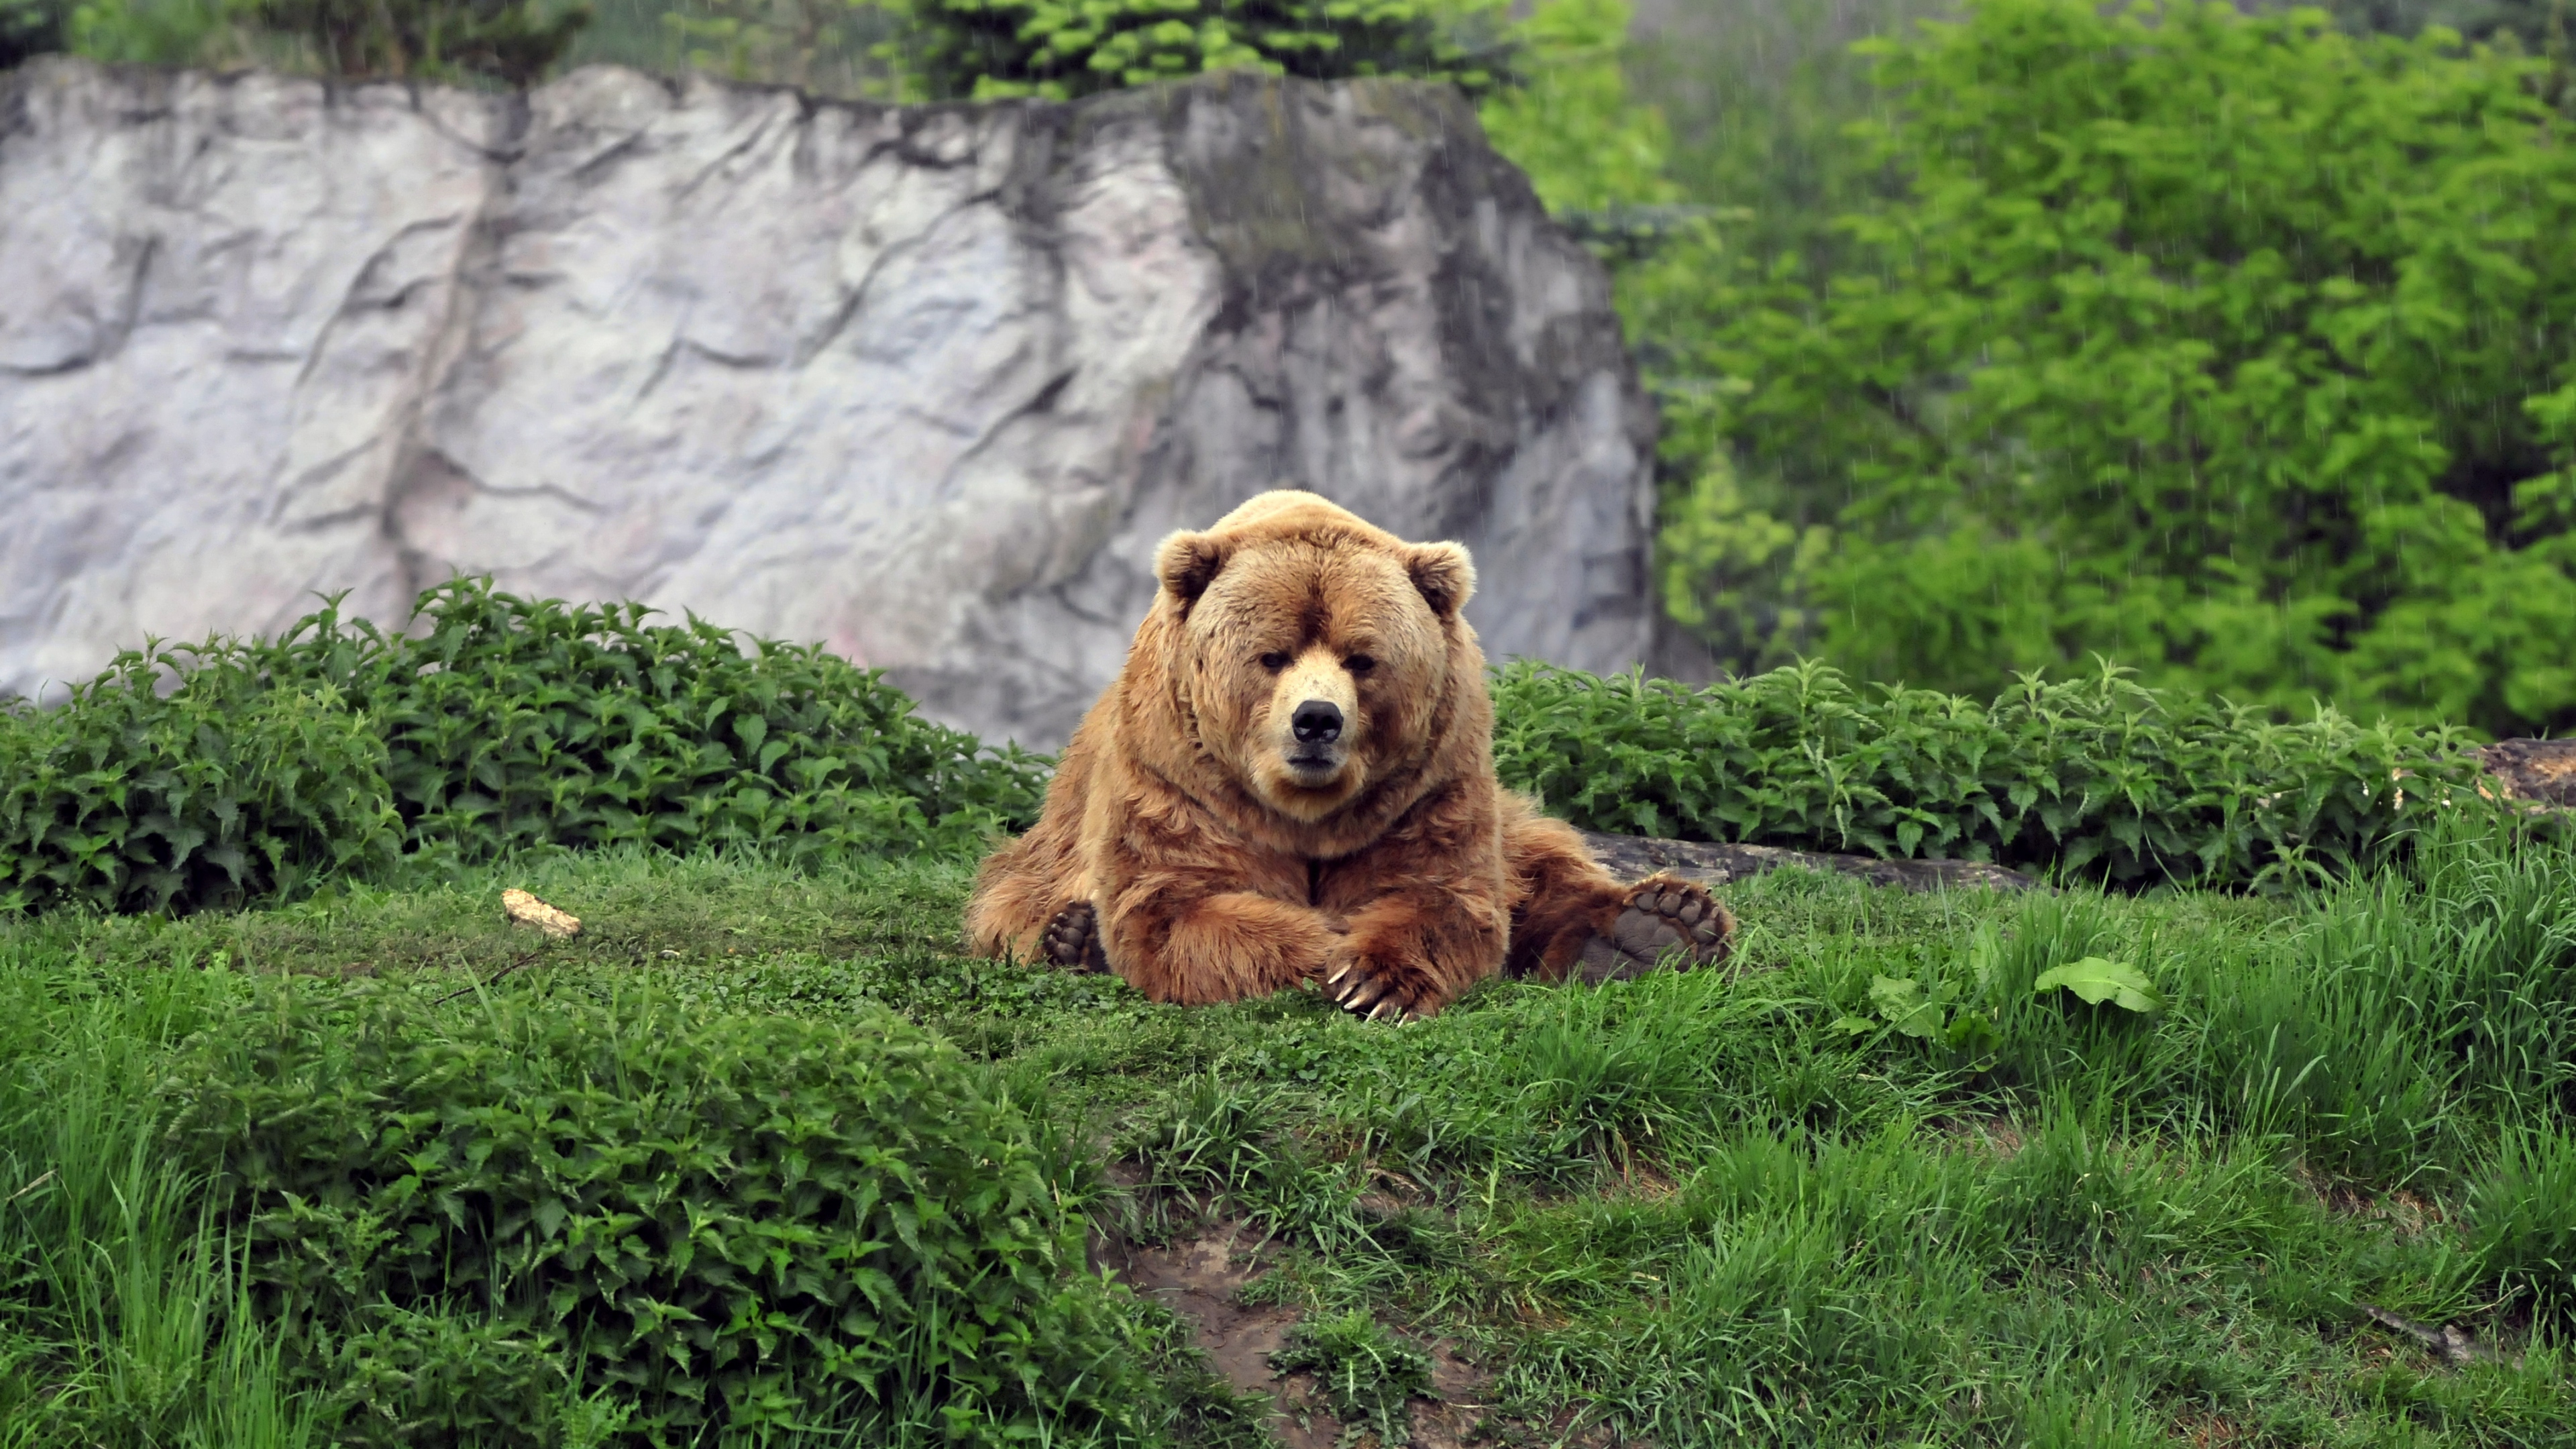 Wallpapers bear lying on the lawn grass on the desktop